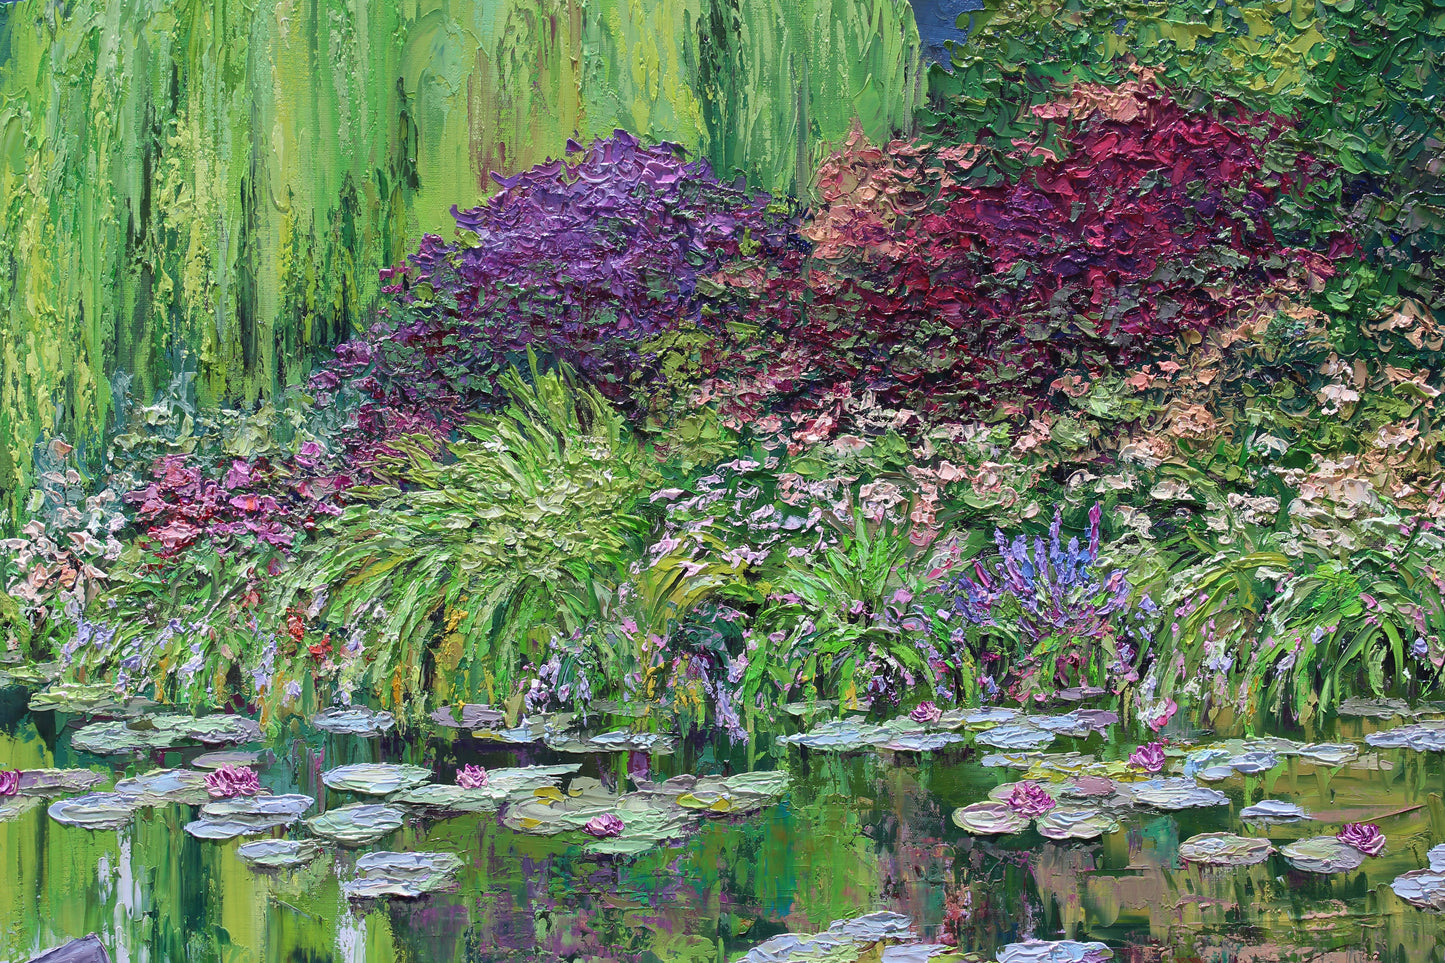 The Norwegian boat At Giverny,  Extra Large 50" x 60" Garden Landscape Of Monet's Waterlily Pond, Oil On Canvas